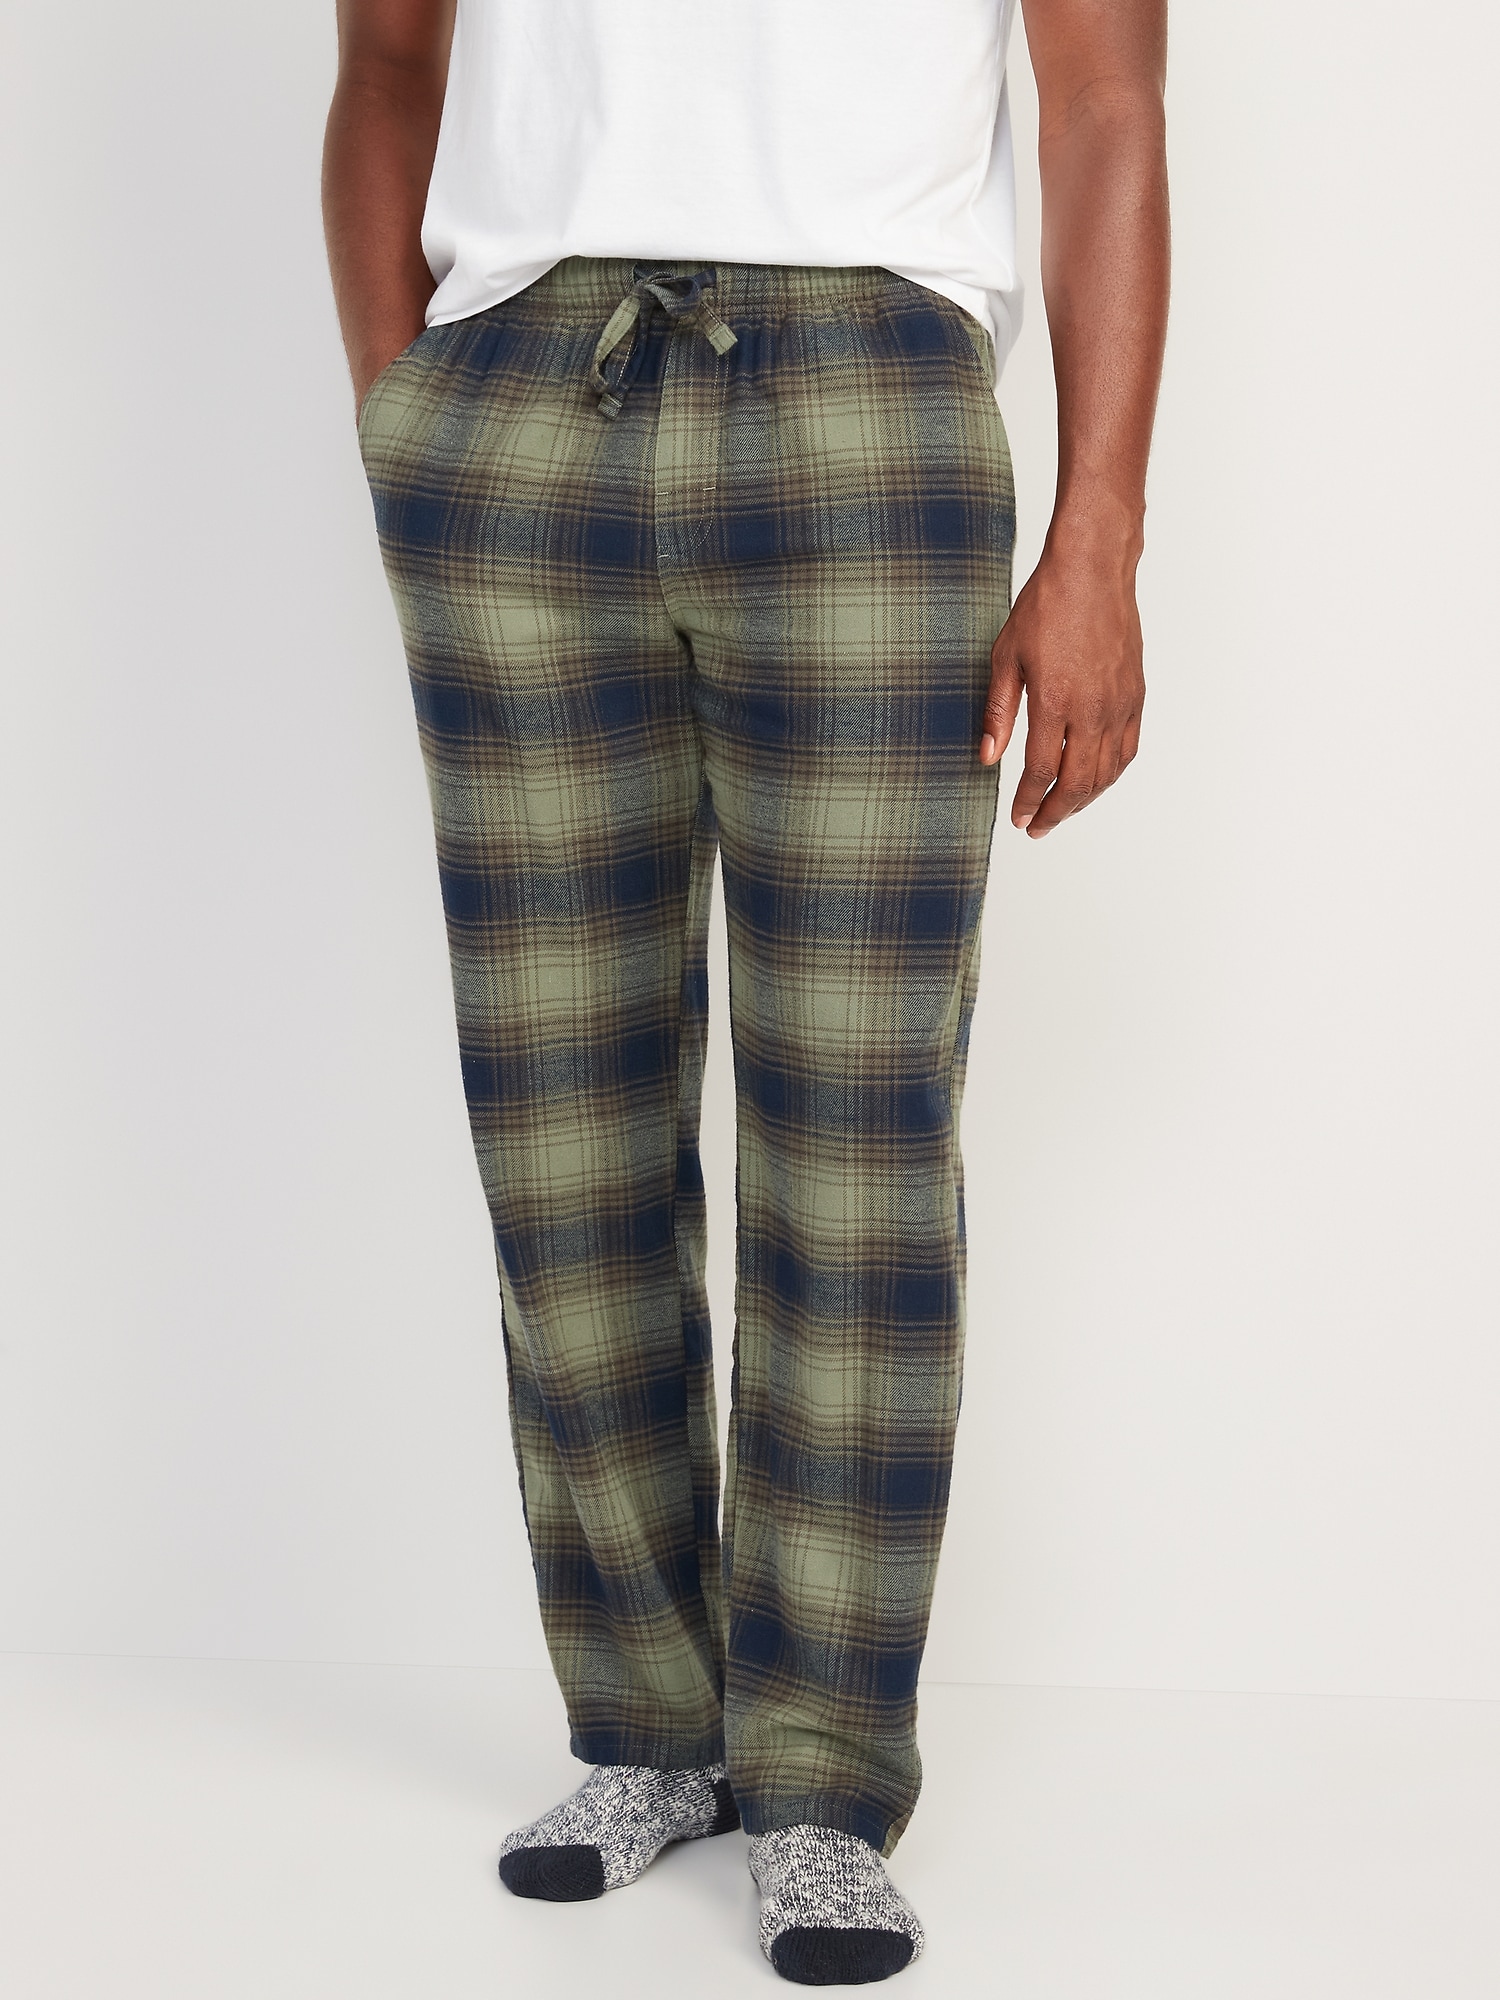 Old Navy Mens Pajama Pants Blue Green Plaid Check Flannel Size Small NWT